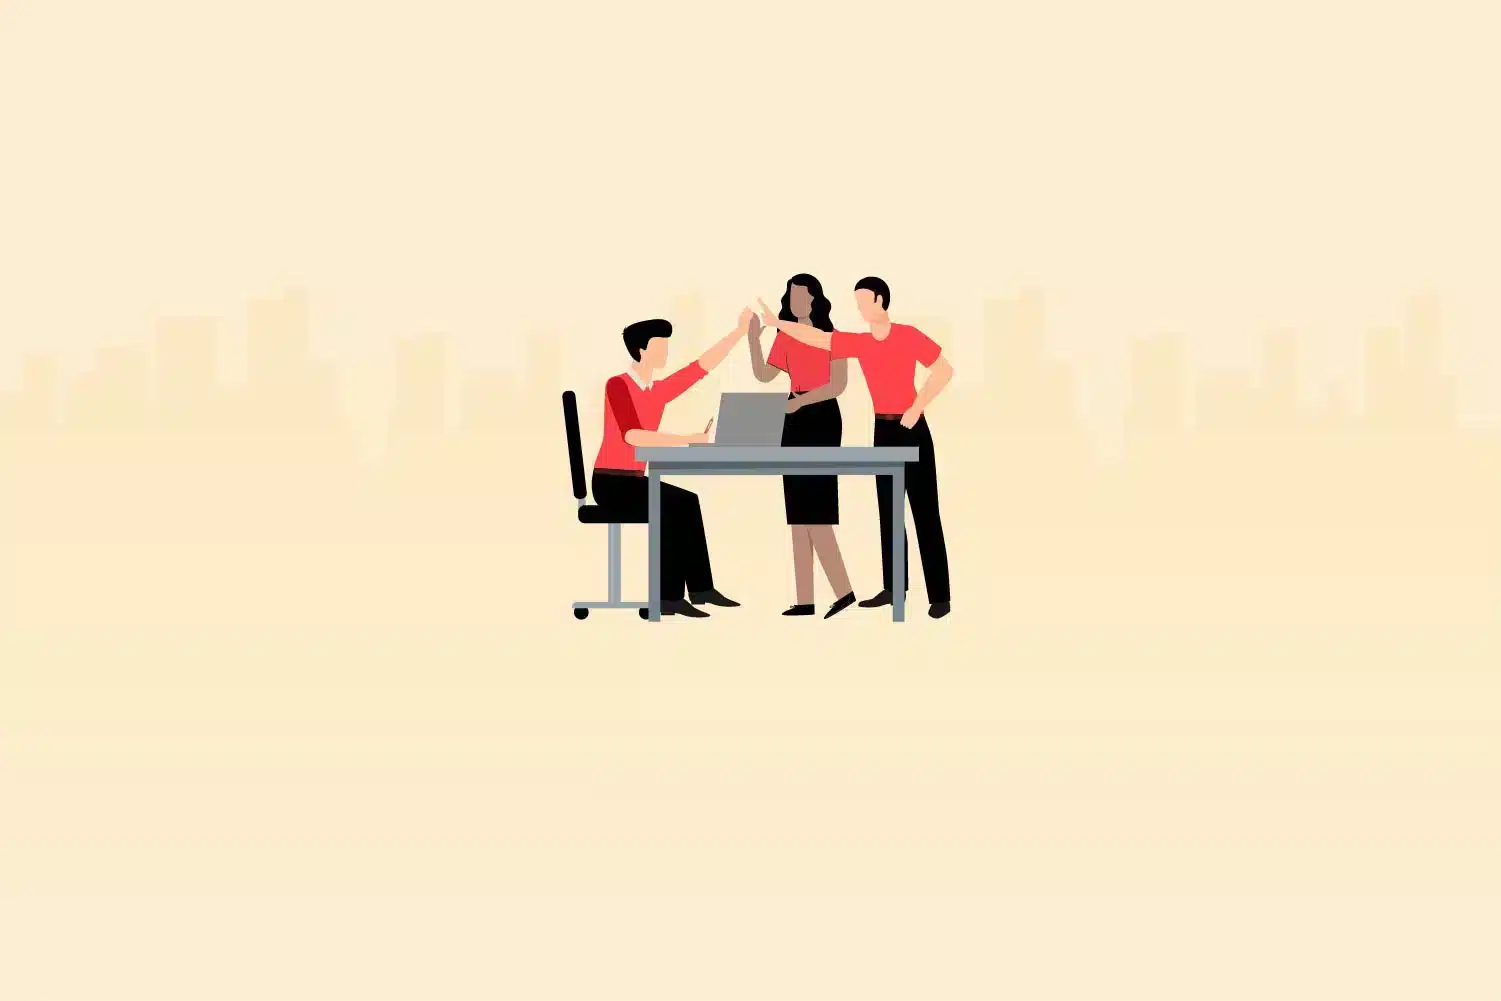 How to create a workplace where employees thrive